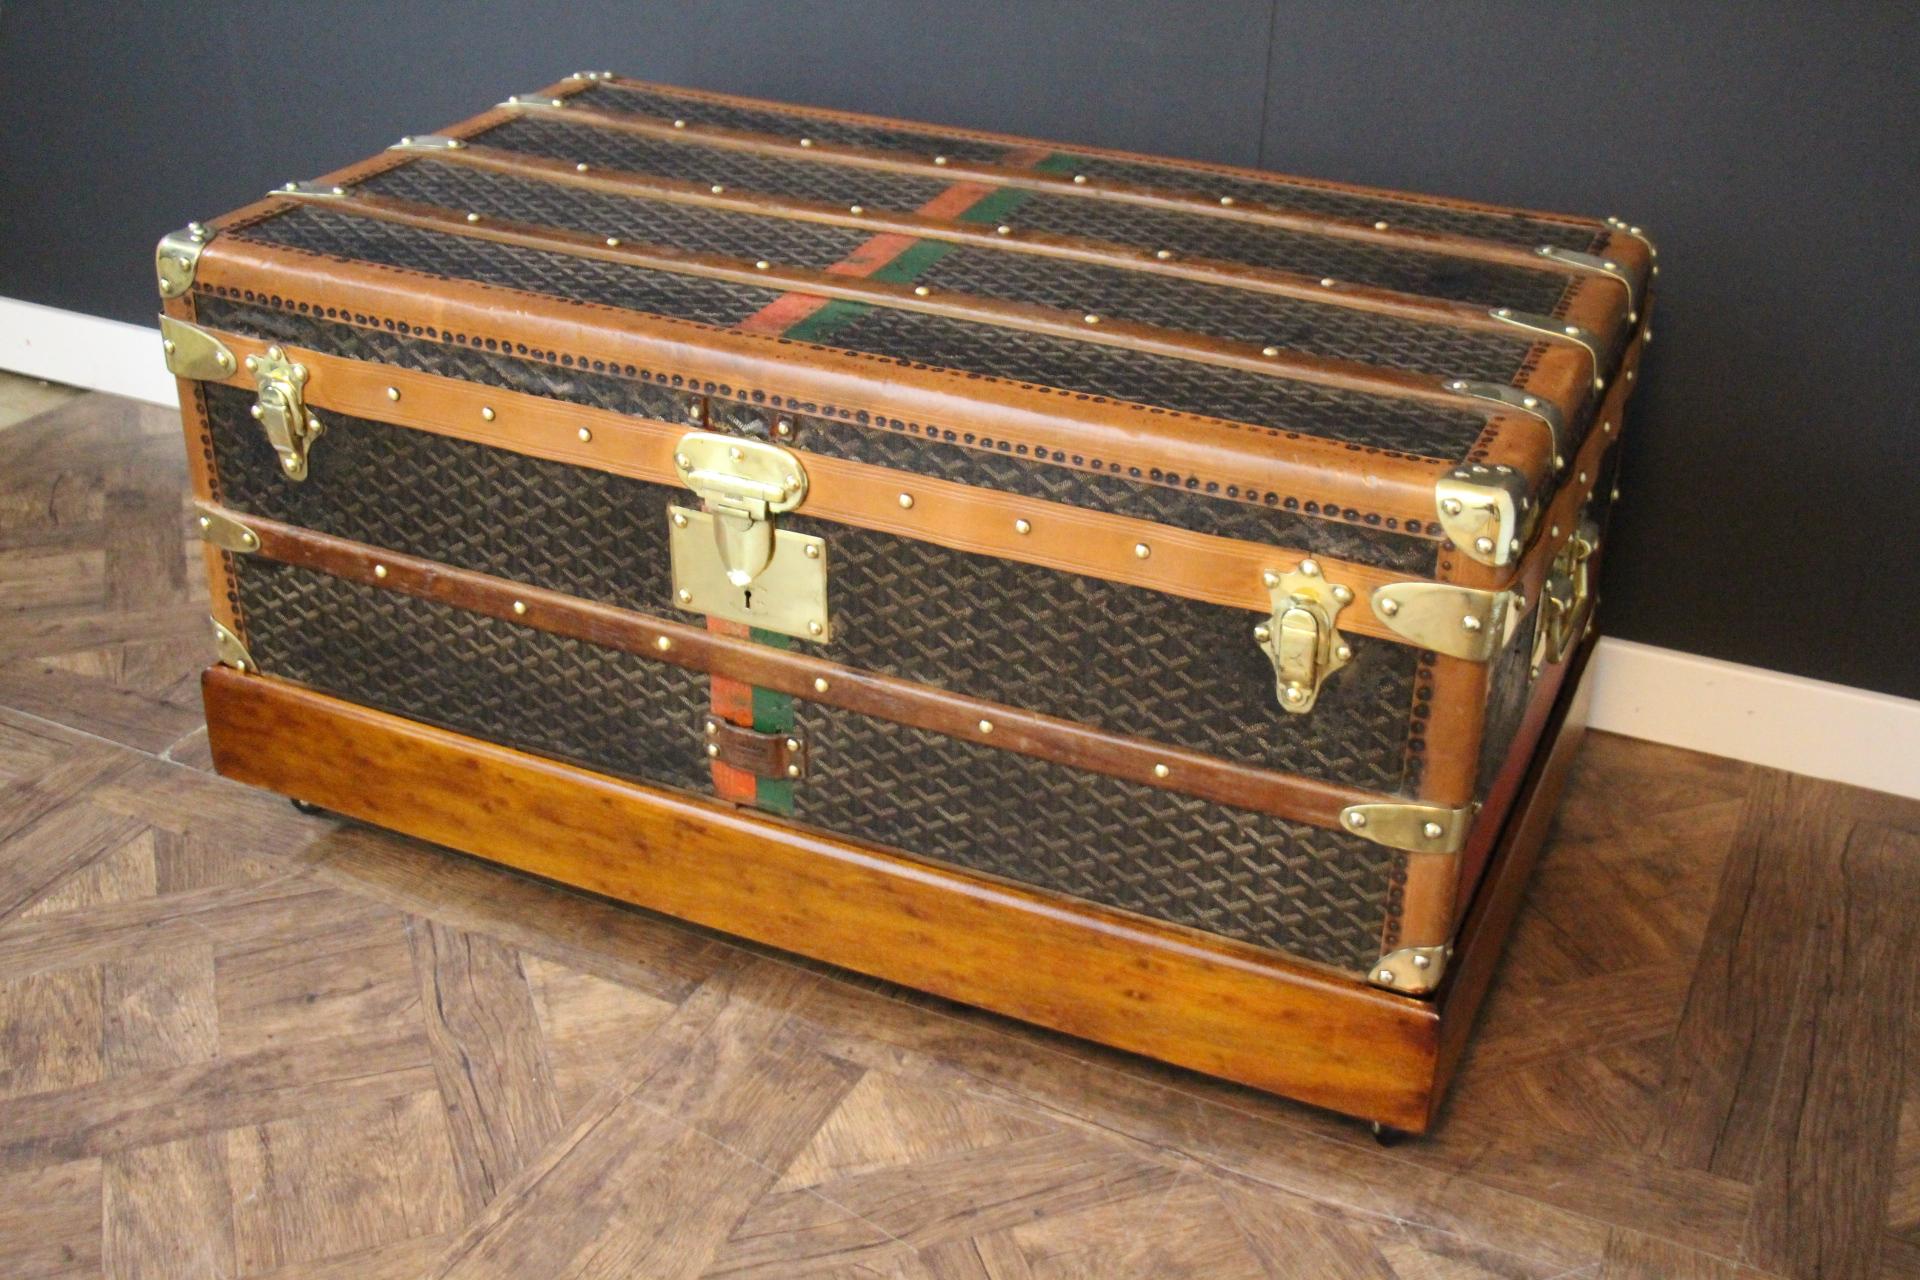 This superb Goyard steamer trunk features the very sought after chevrons canvas as well as all solid brass fittings: Goyard marked side handles and locks. Brass studs. This trunk has many wood slats as well as all toffee color  lozine trims. It is